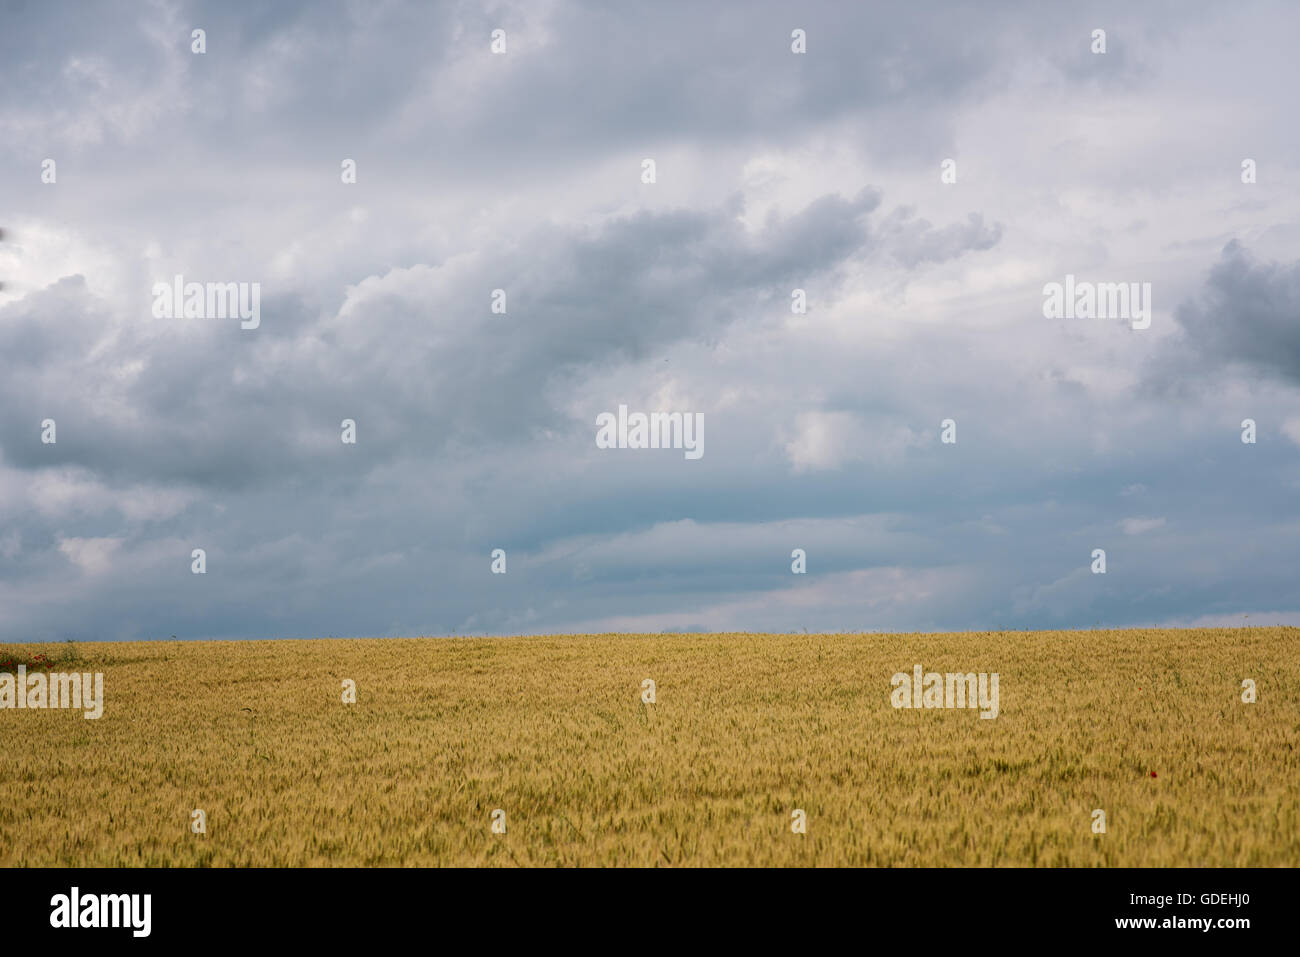 Wheat field with overcast sky Stock Photo